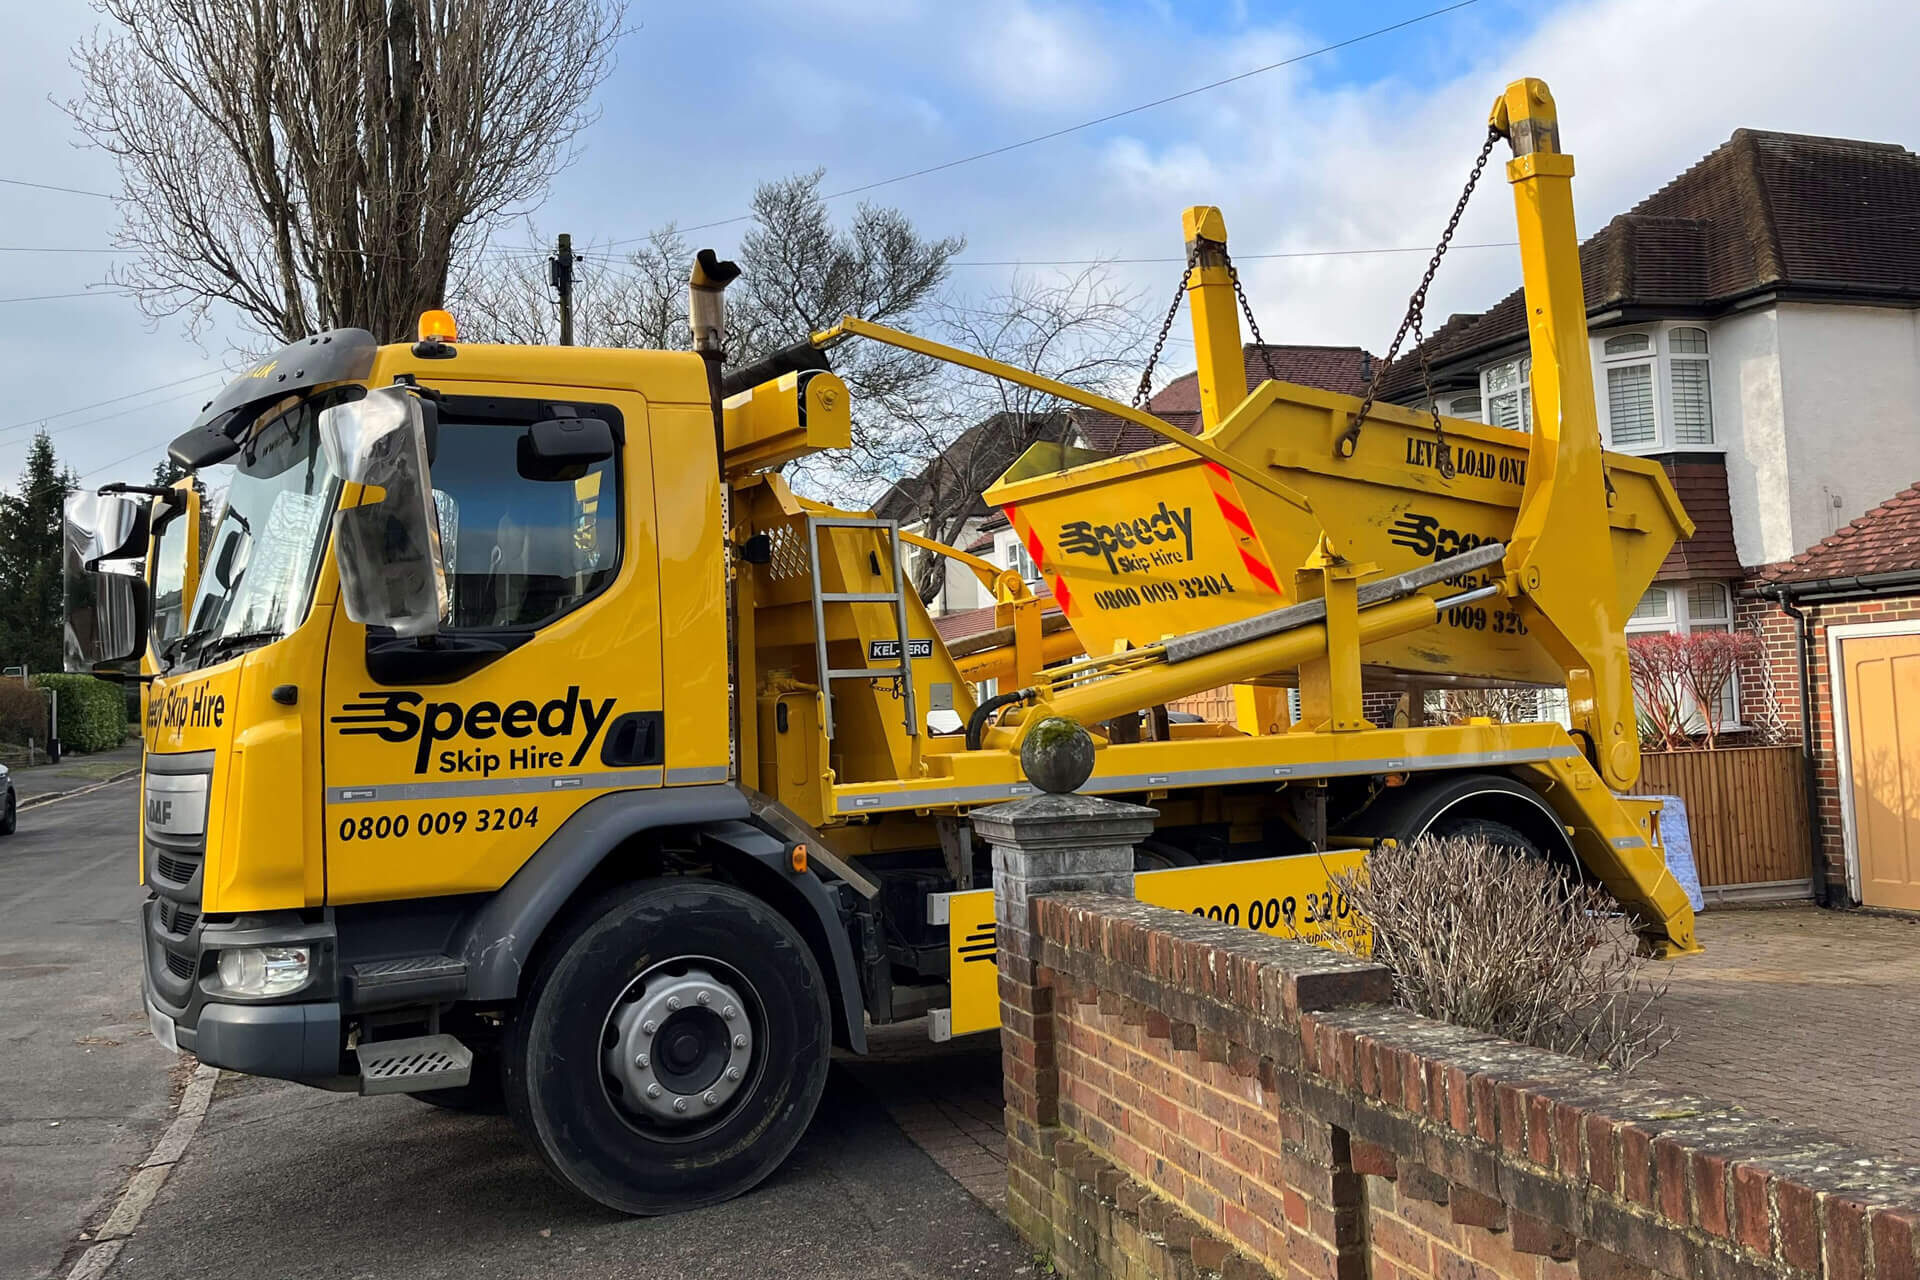 Trusted Surrey & Greater London Skip Hire & Waste Clearance services